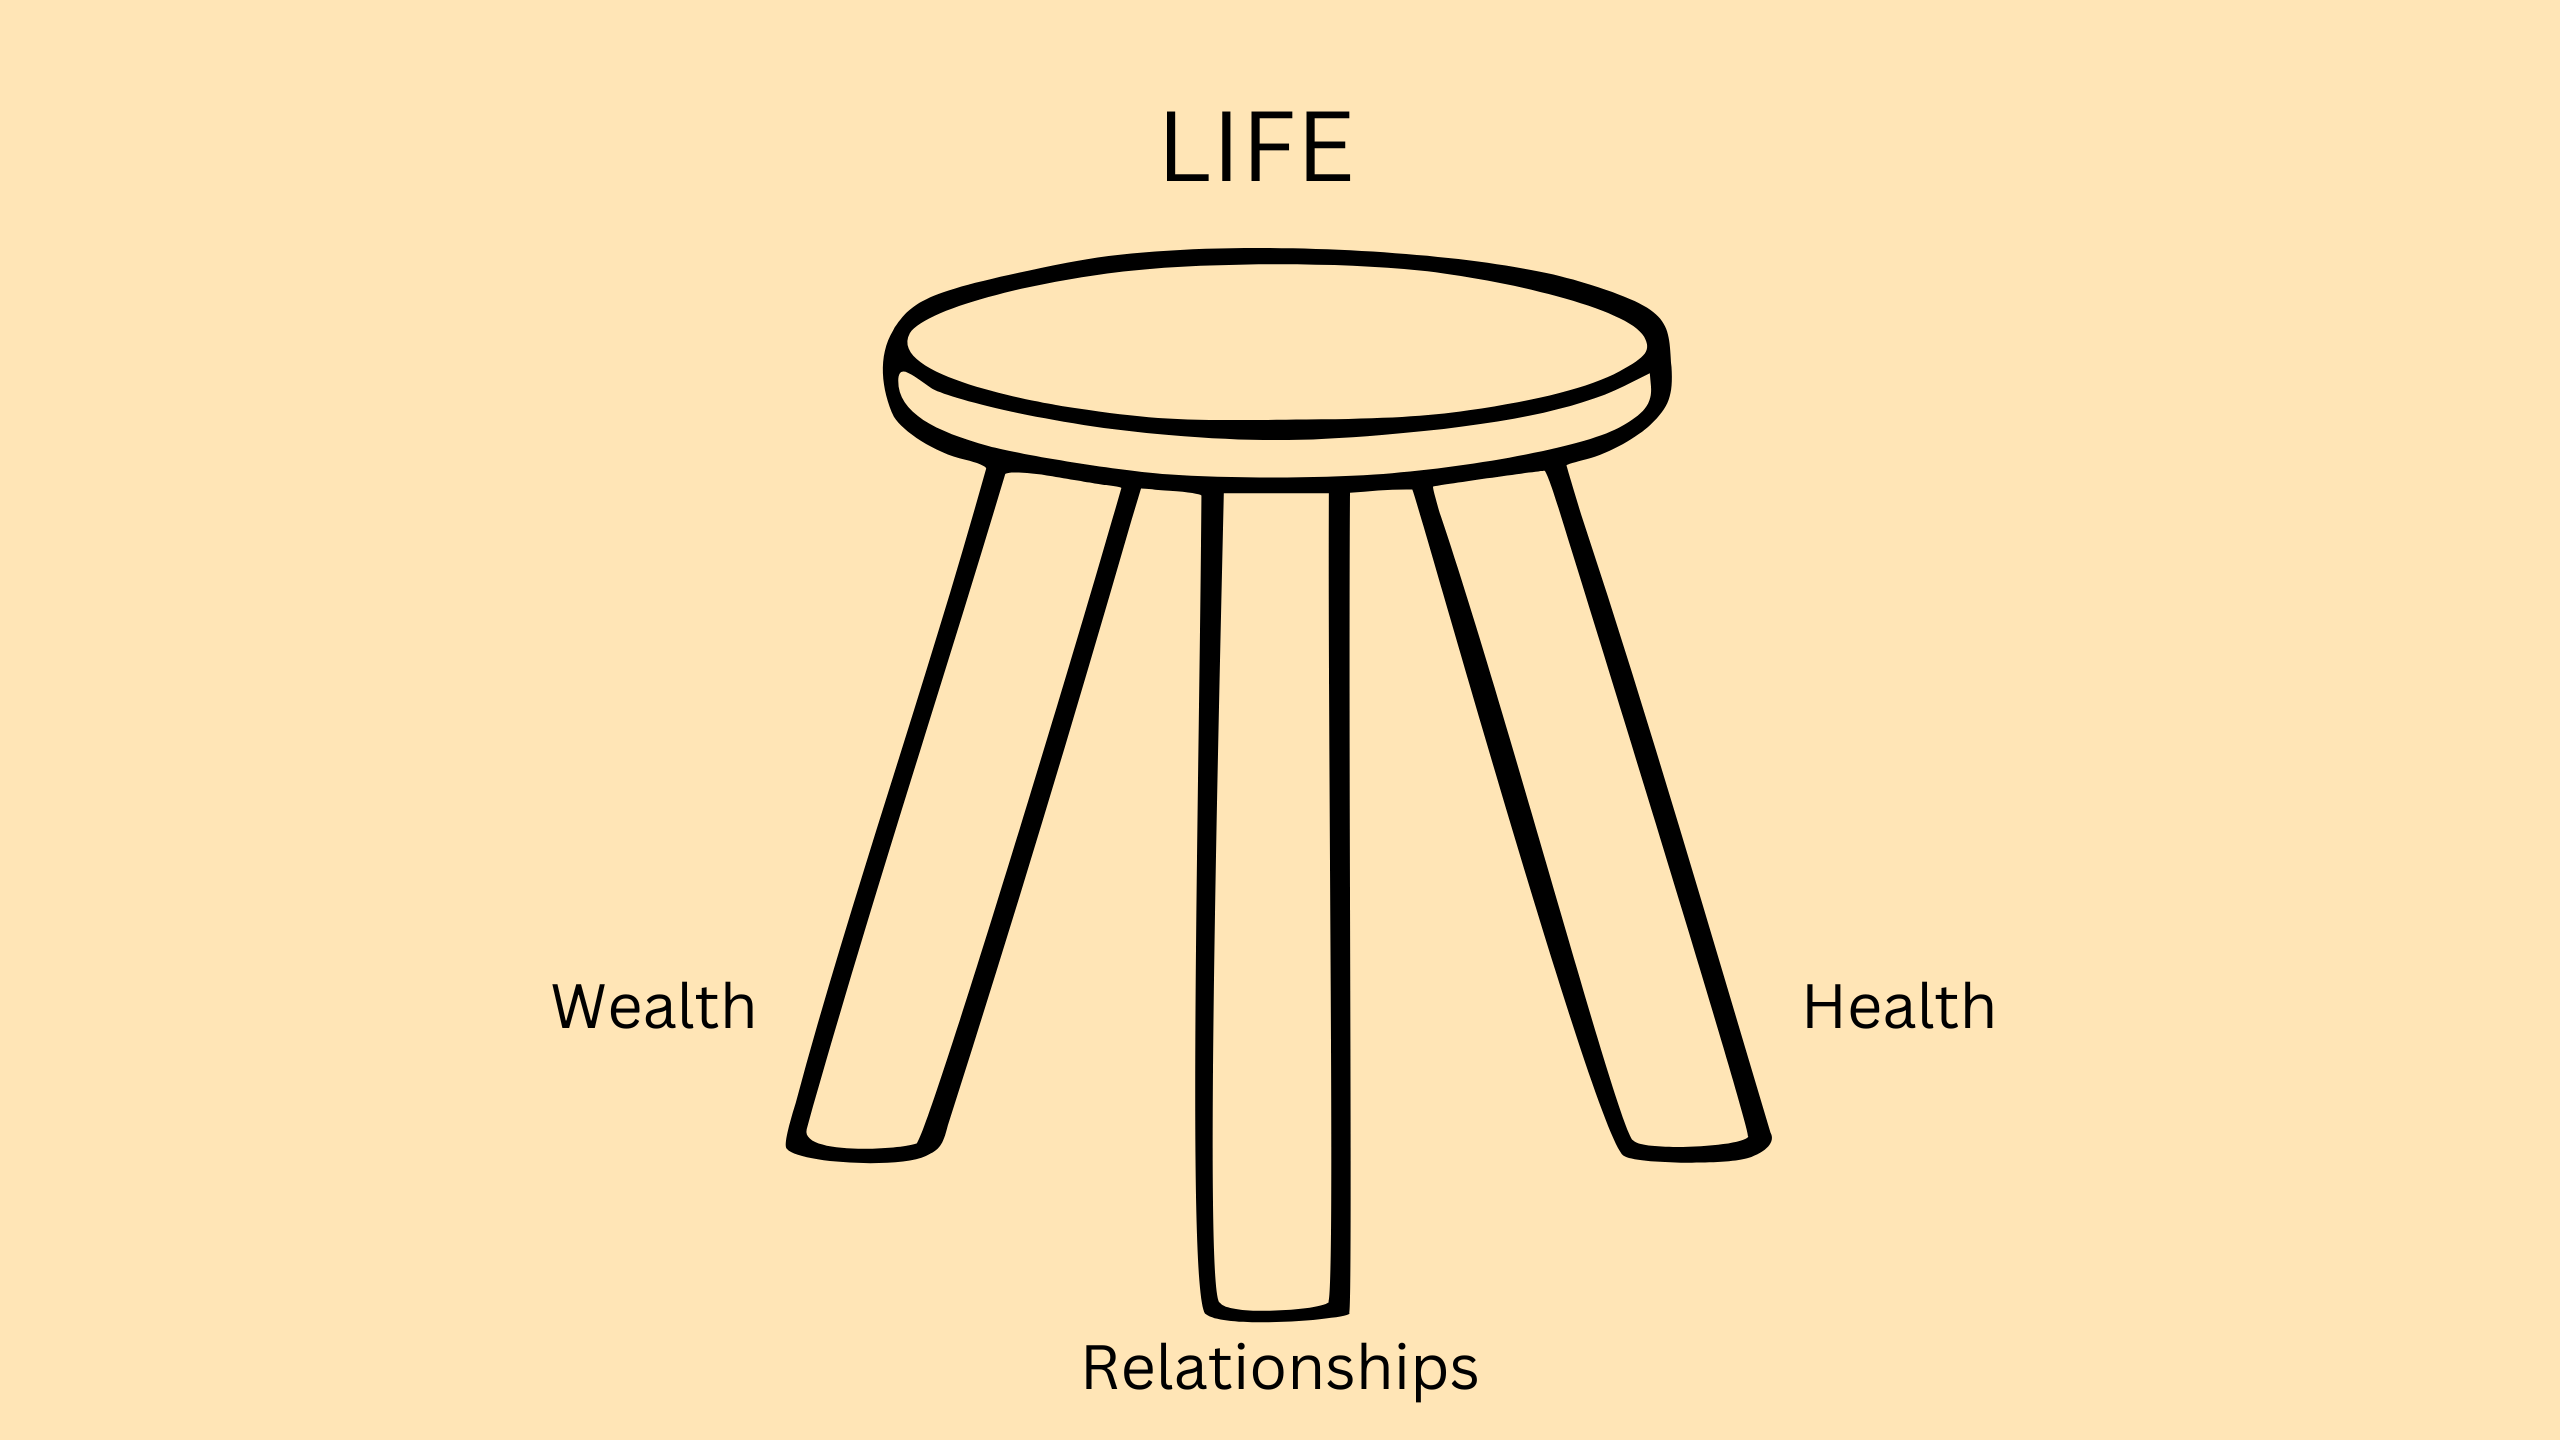 the 3 areas of life: health, wealth and relationships are the foundation of life